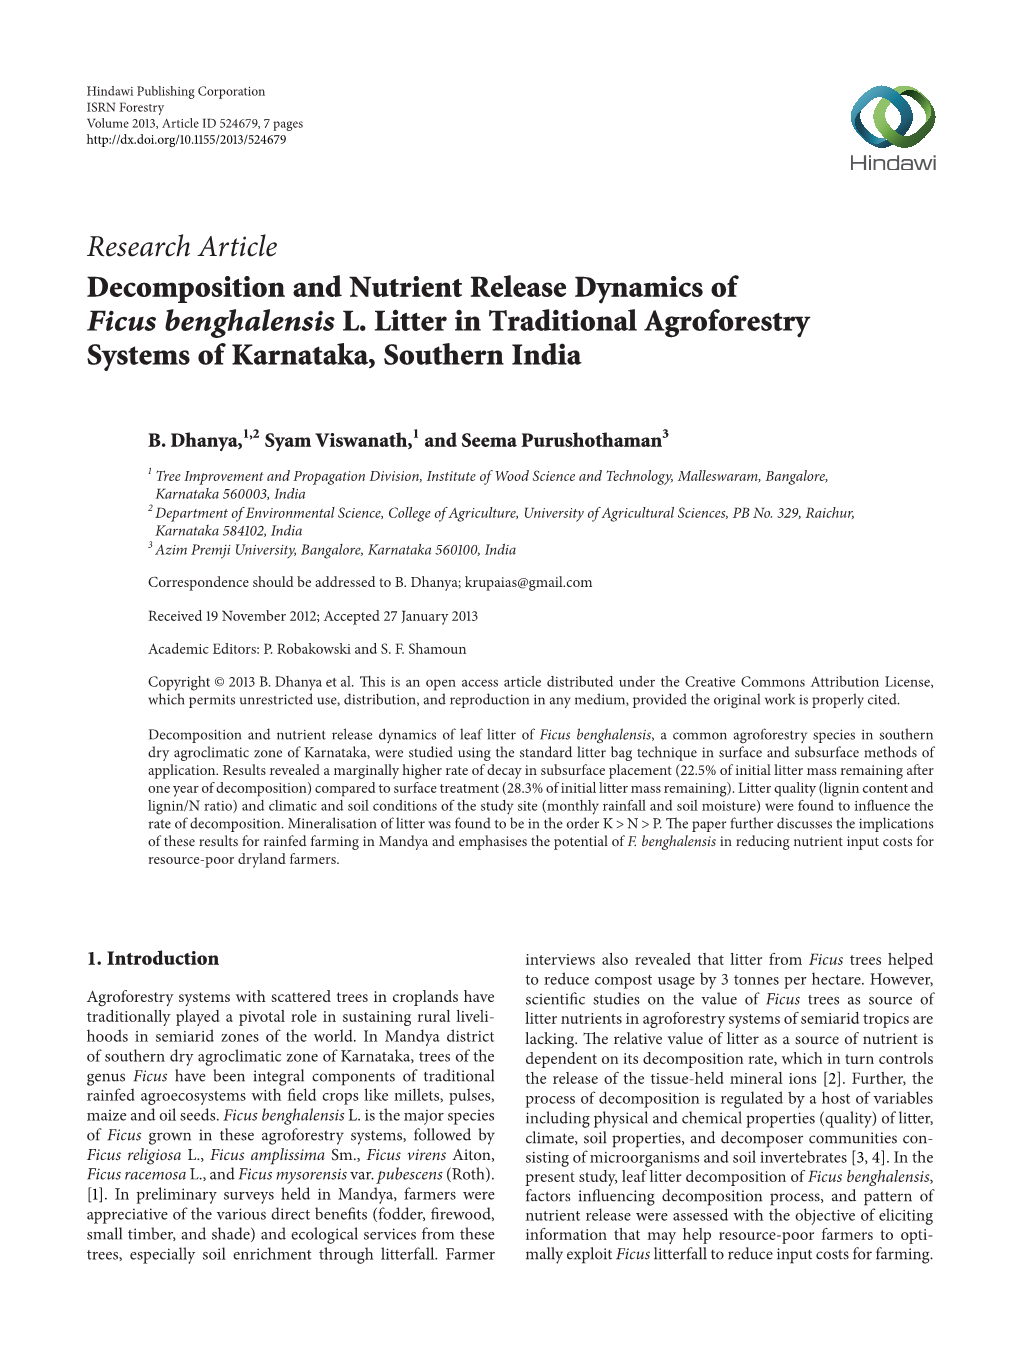 Research Article Decomposition and Nutrient Release Dynamics of Ficus Benghalensis L